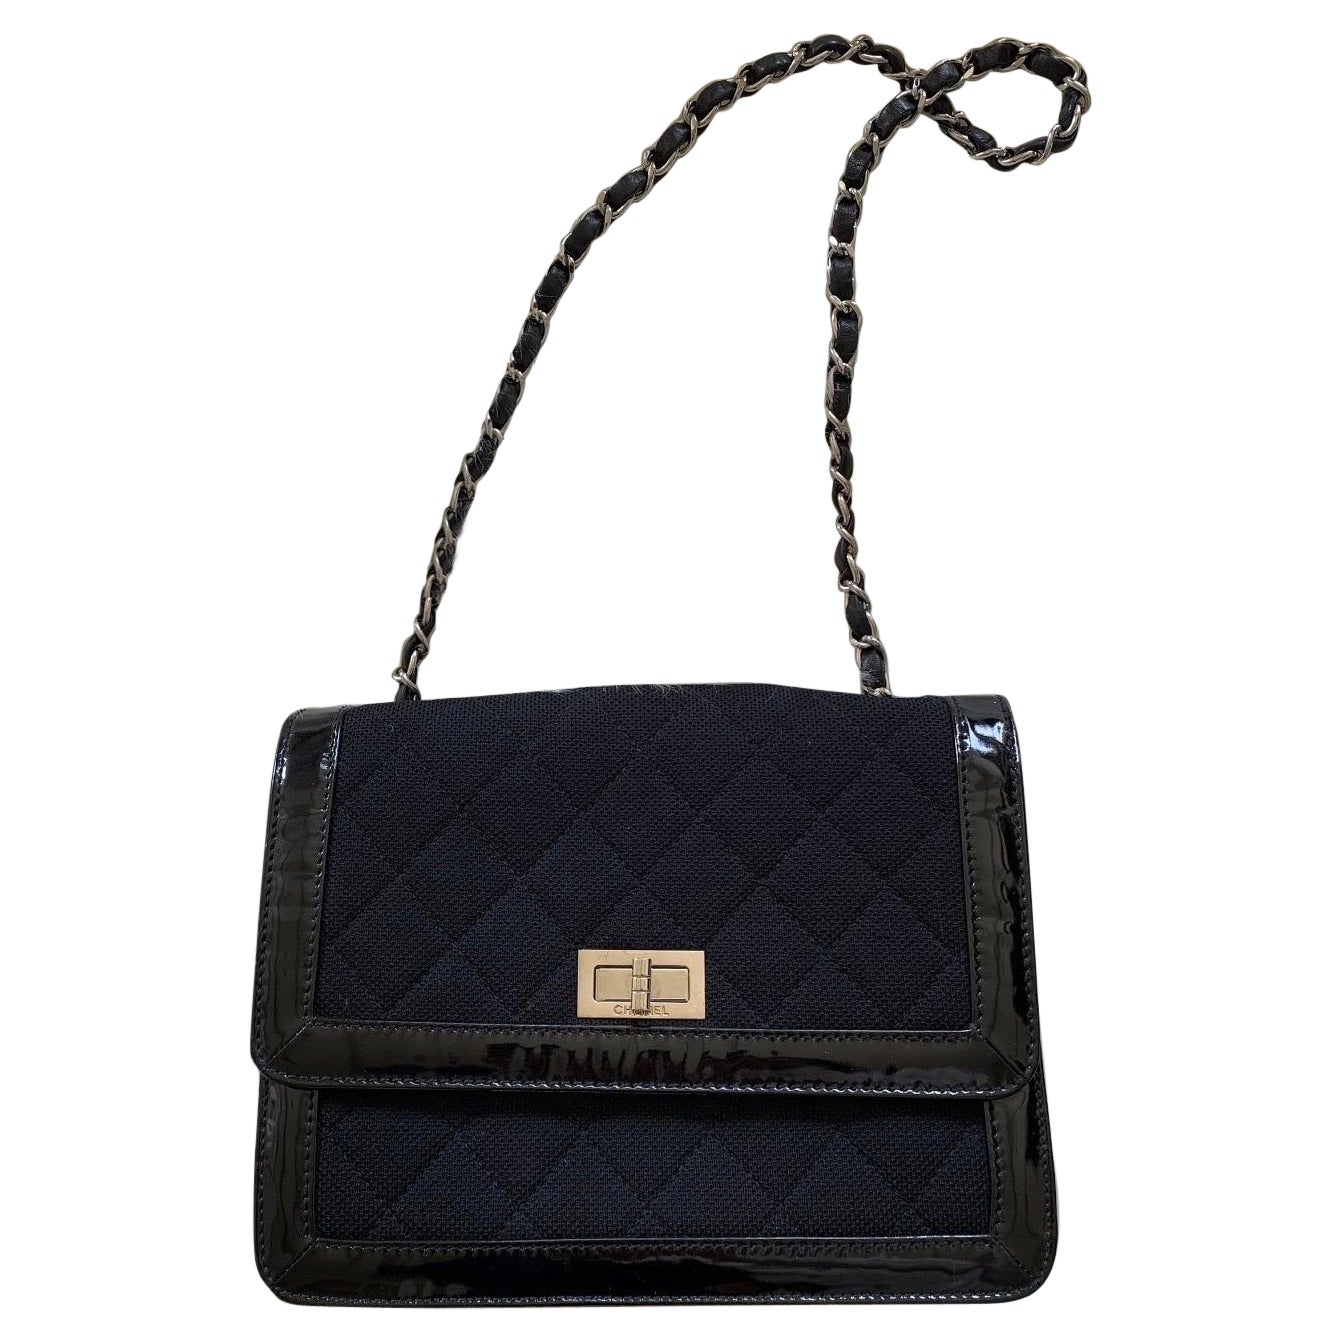 CHANEL quilted patent trim jersey bag